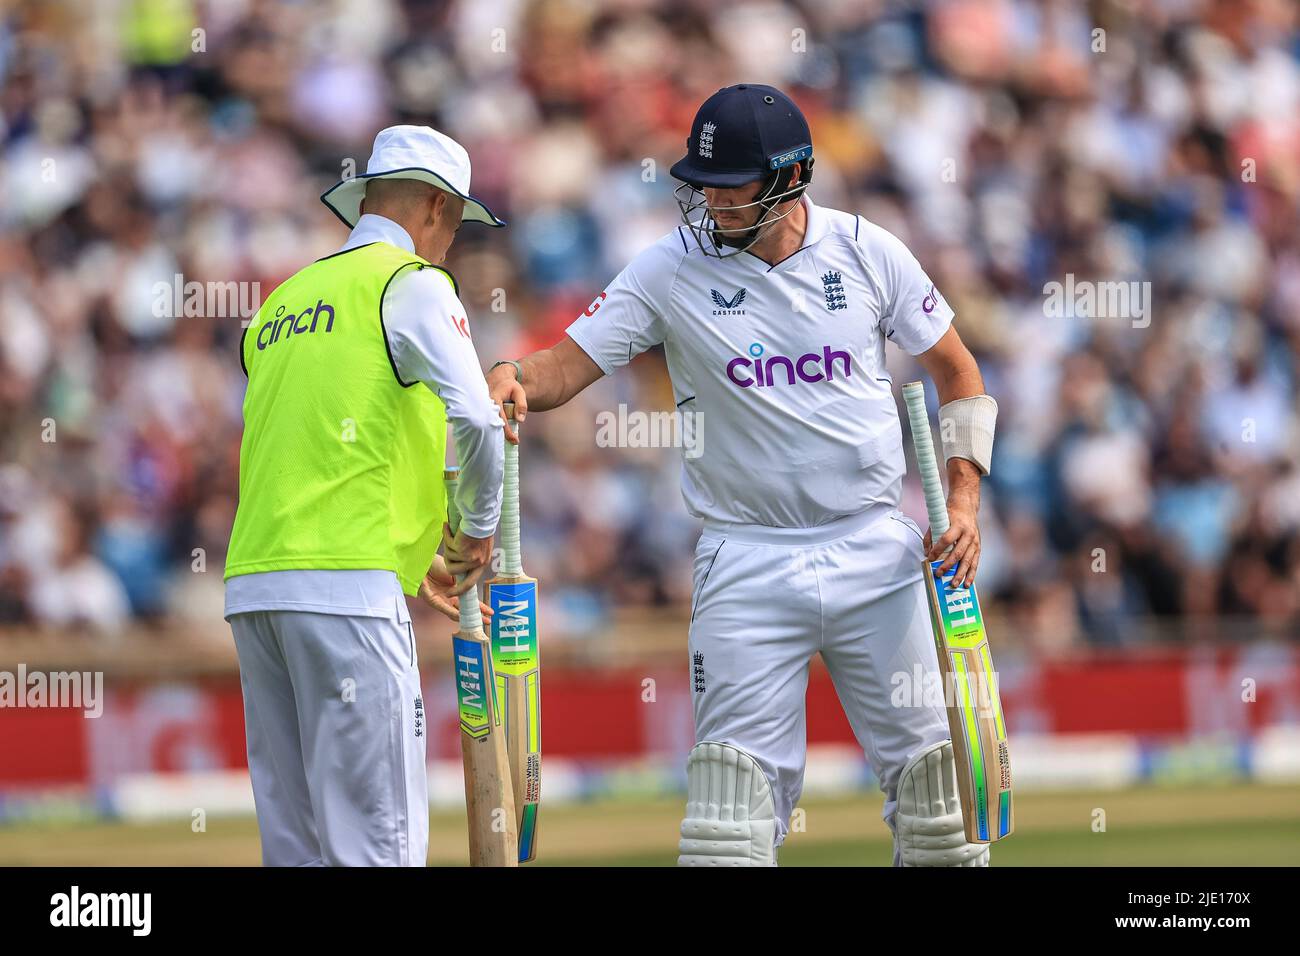 Jamie Overton of England swaps bats during the game Stock Photo